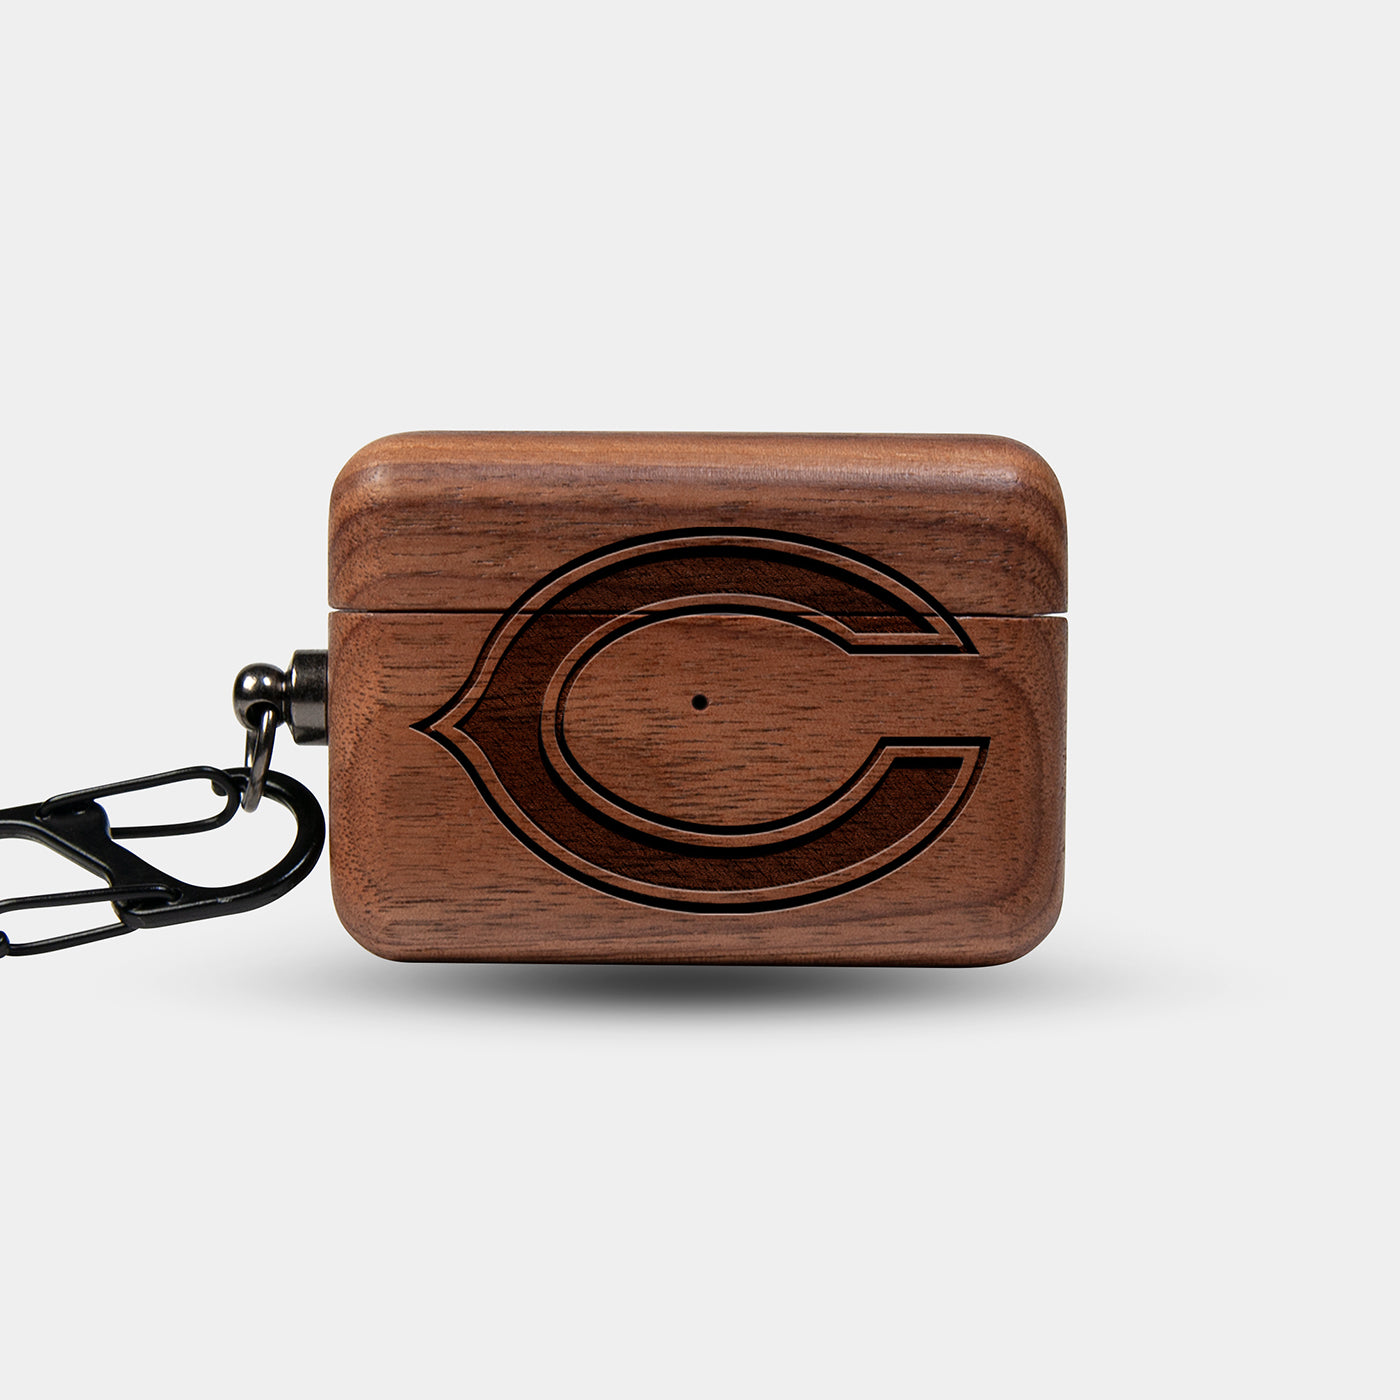 Custom Chicago Bears AirPods Cases | AirPods | AirPods Pro | AirPods Pro 2 Case - Carved Wood Chicago Bears AirPods Cover - Eco-friendly Chicago Bears AirPods Case - Custom Chicago Bears Gift For Him - Monogrammed Personalized AirPods Cover By Engraved In Nature